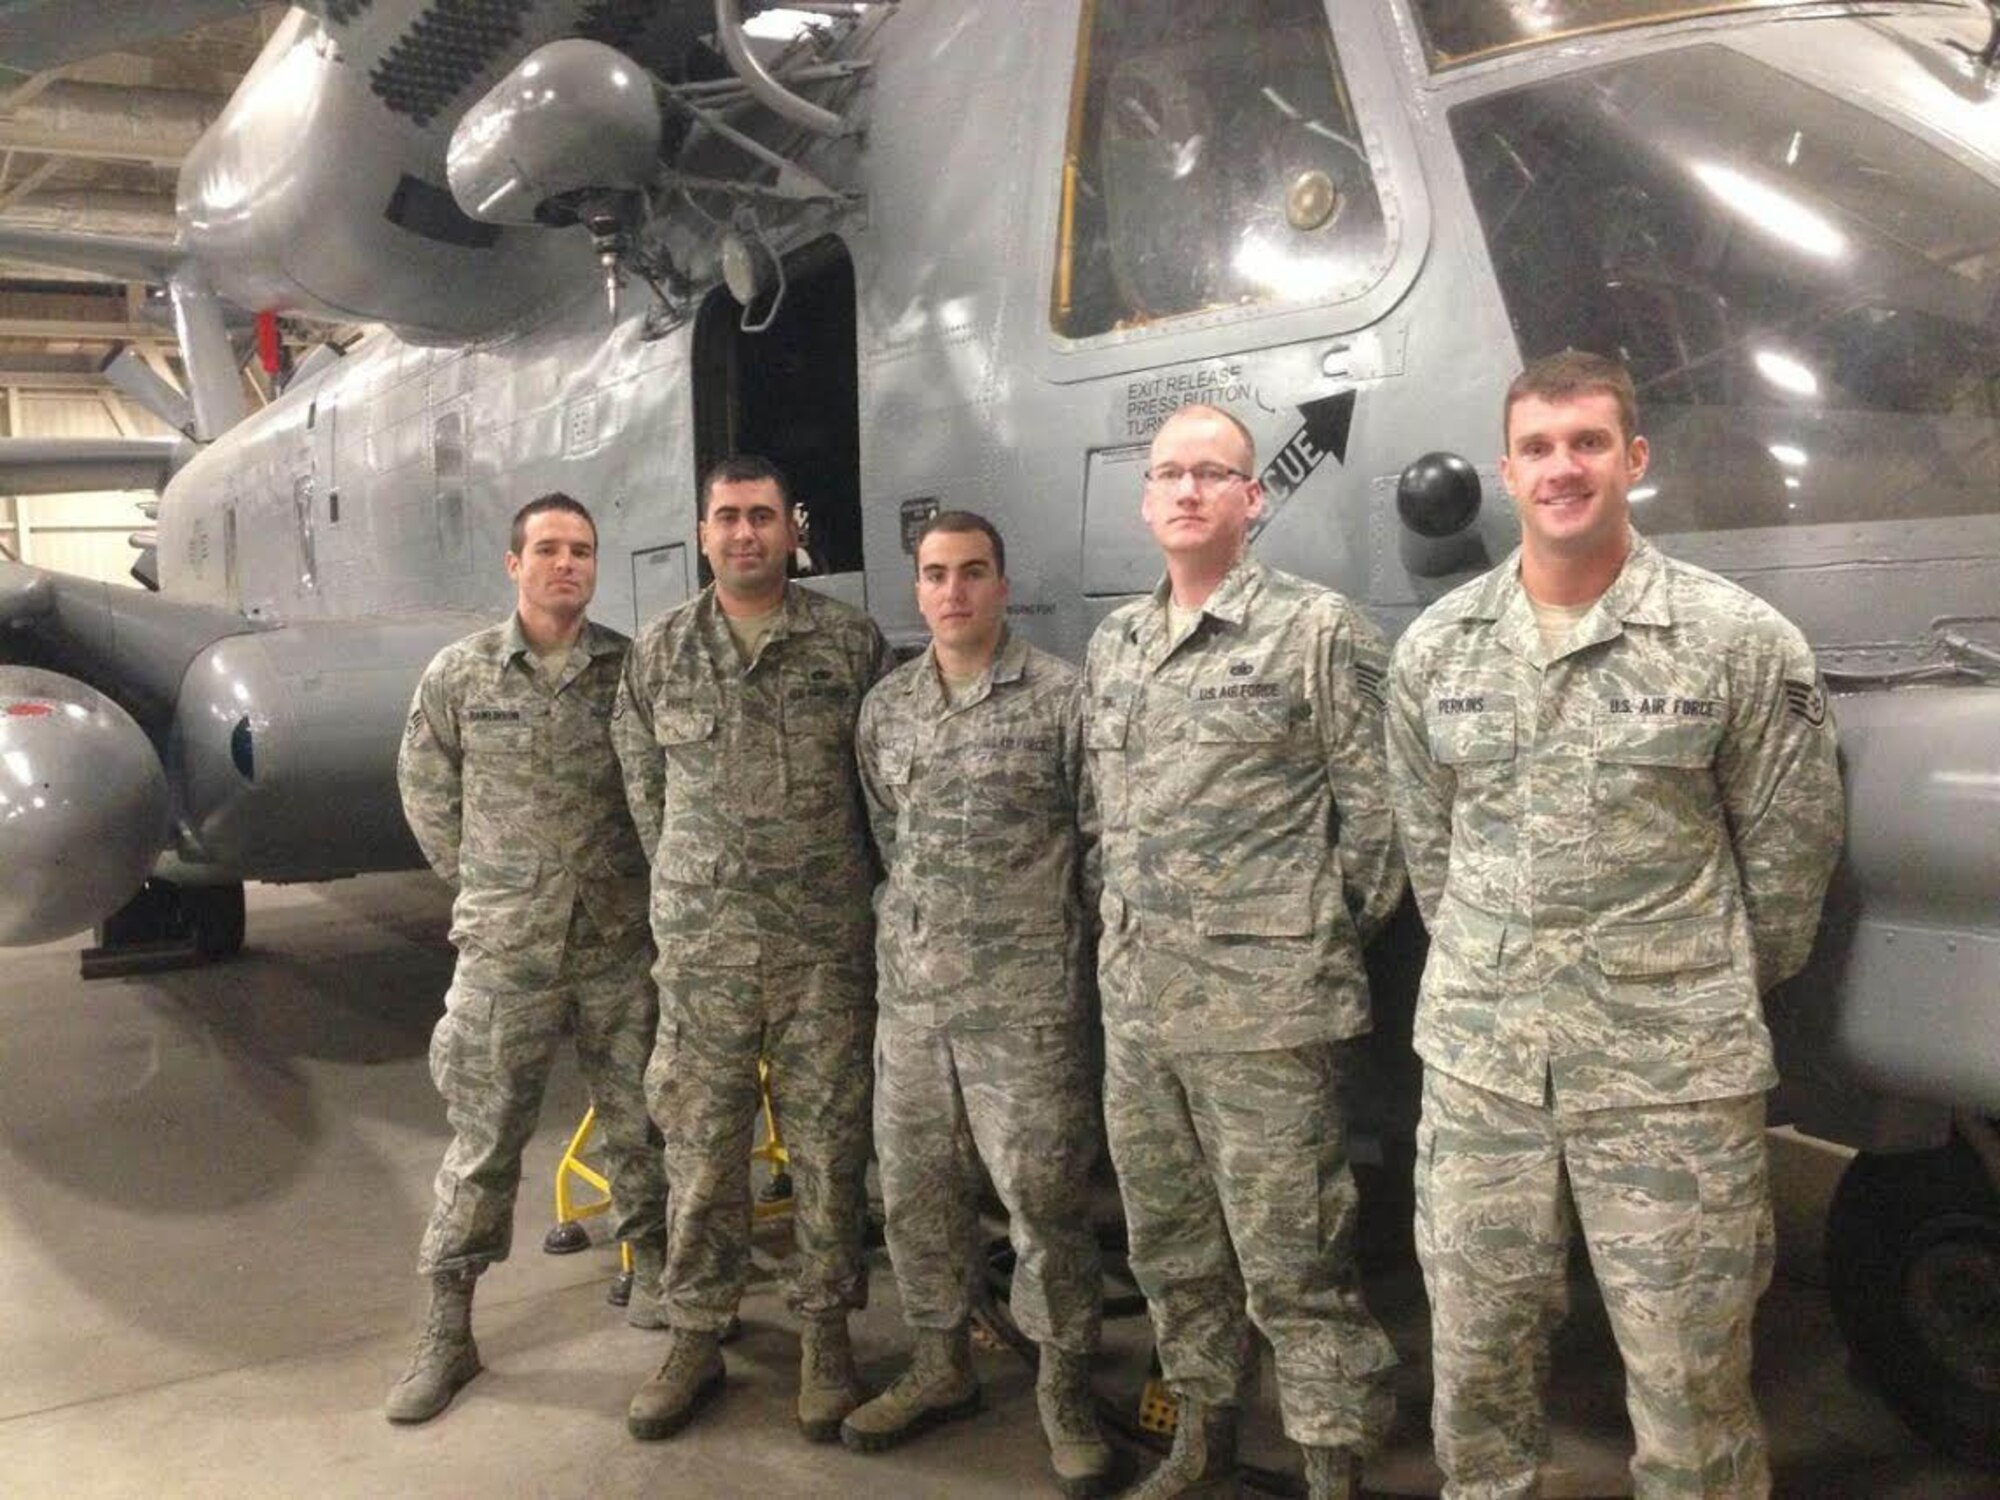 Staff Sgt. Matthew Tidball, (Second from right) 509th Logistics Readiness Squadron fuels hydrants supervisor, poses with members of his three level course in front of a MH-53 Pave Low helicopter at Lackland Air Force Base, Texas. The three level course was one of five courses Tidball has to complete for training. (Courtesy Photo)